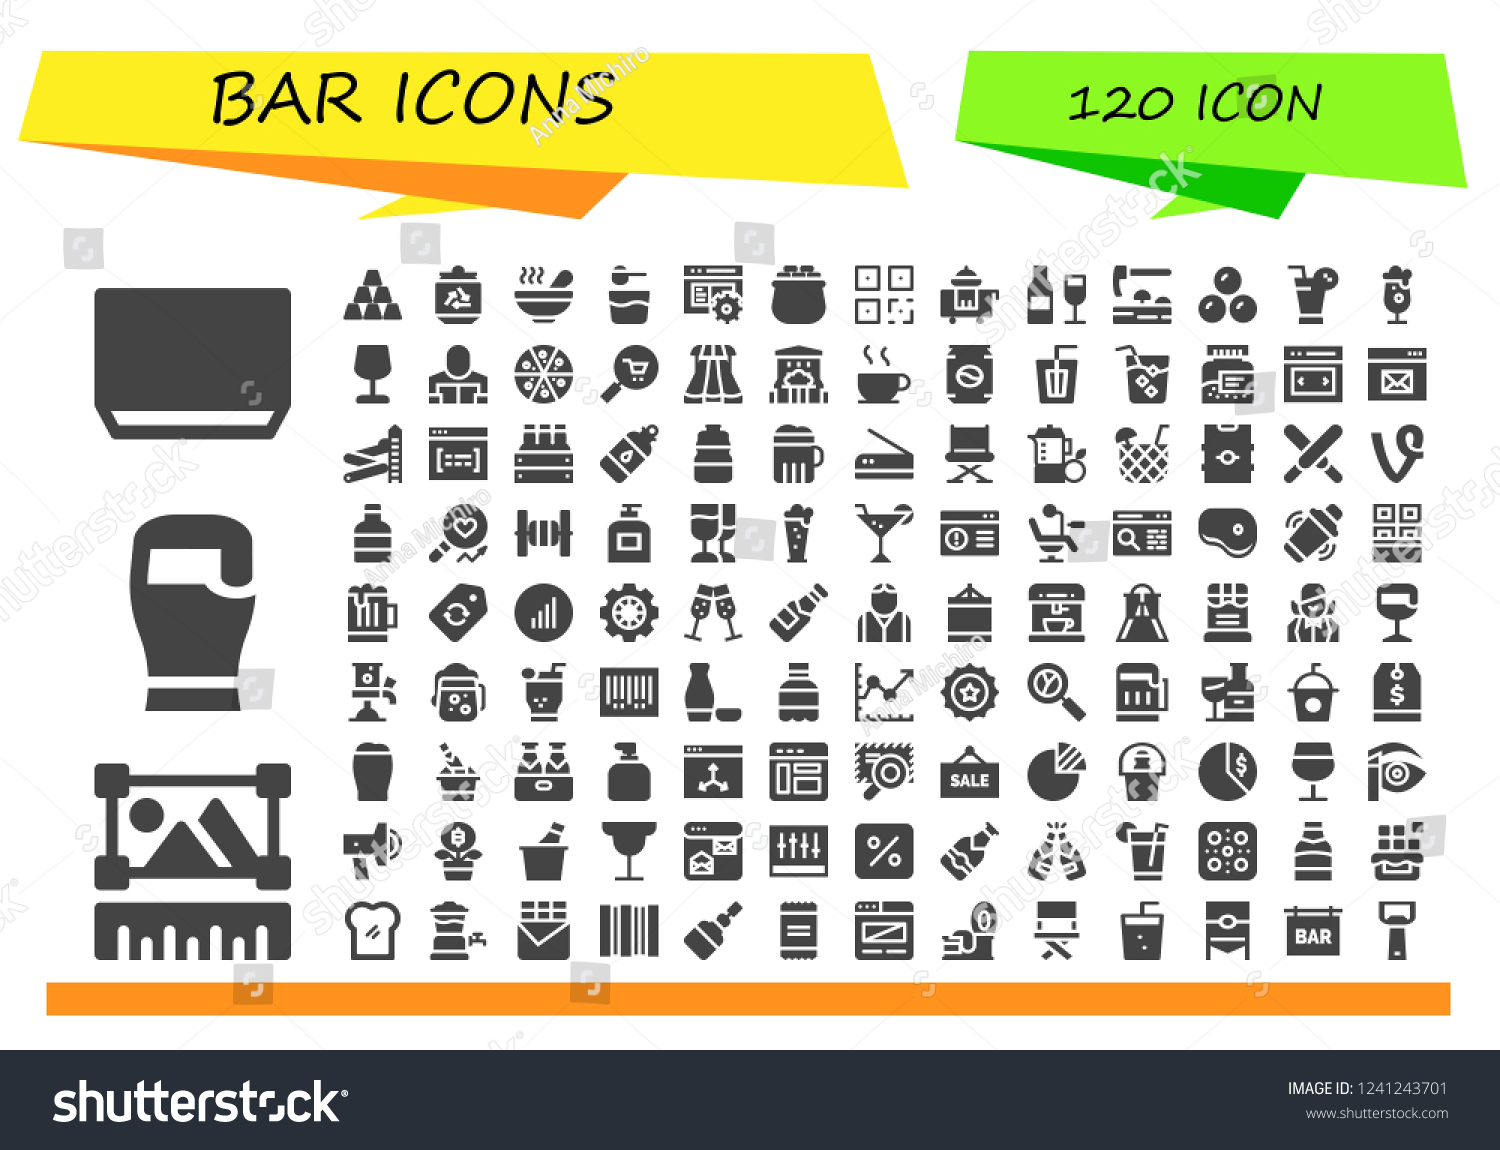 SVG of Vector icons pack of 120 filled bar icons. Simple modern icons about  - Soup, Graphic, Beer, Ingot, Can, Powder, Code, Gold, QR, Room service, Wine, Adze, Chocolates, Juice, Wine glass svg